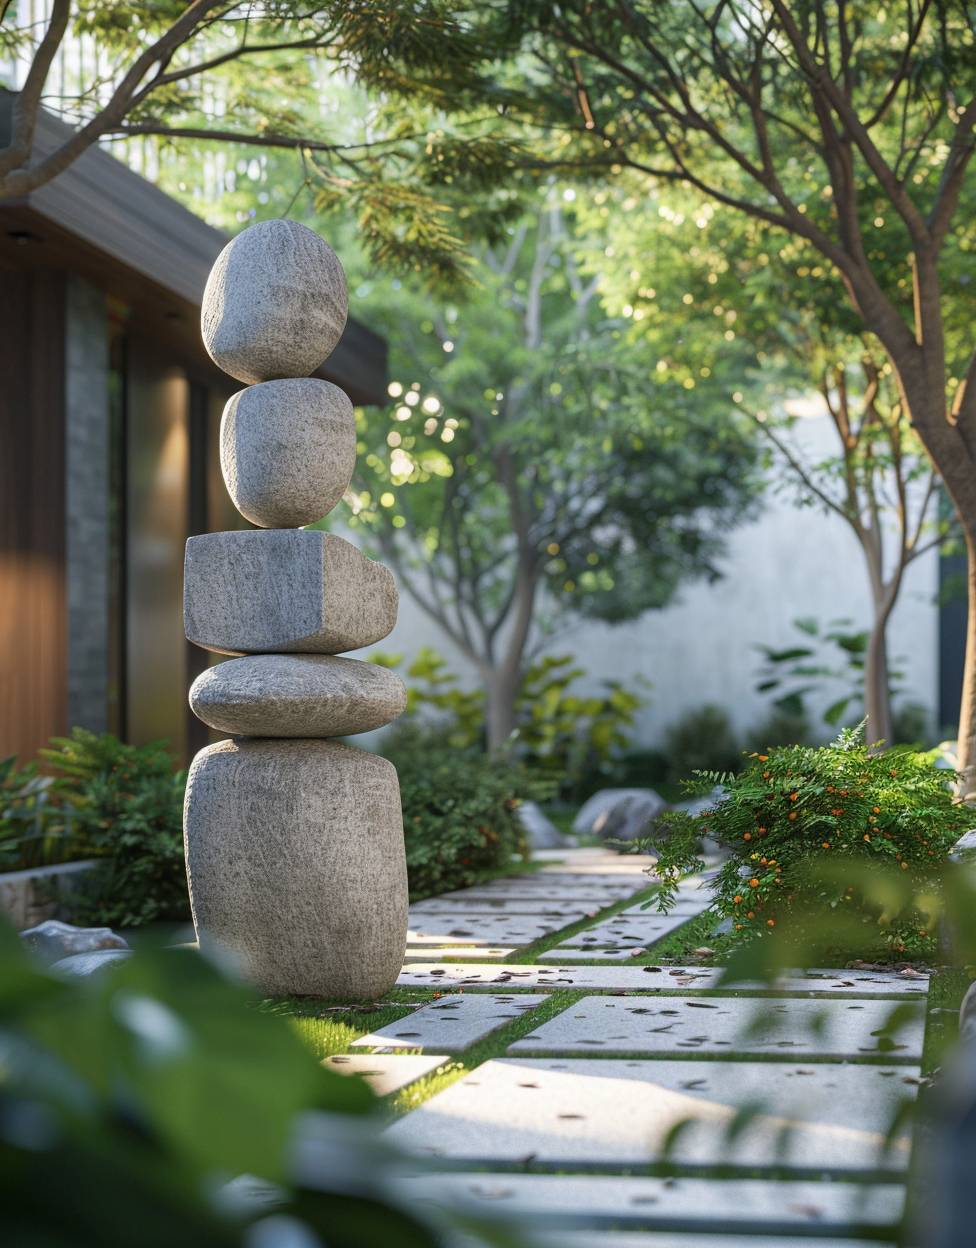 landscape architect, in the style of tranquil serenity, 【vray tracing】, stone sculptures, 【32k uhd】, 【somber mood】, minimalism with movement, wood